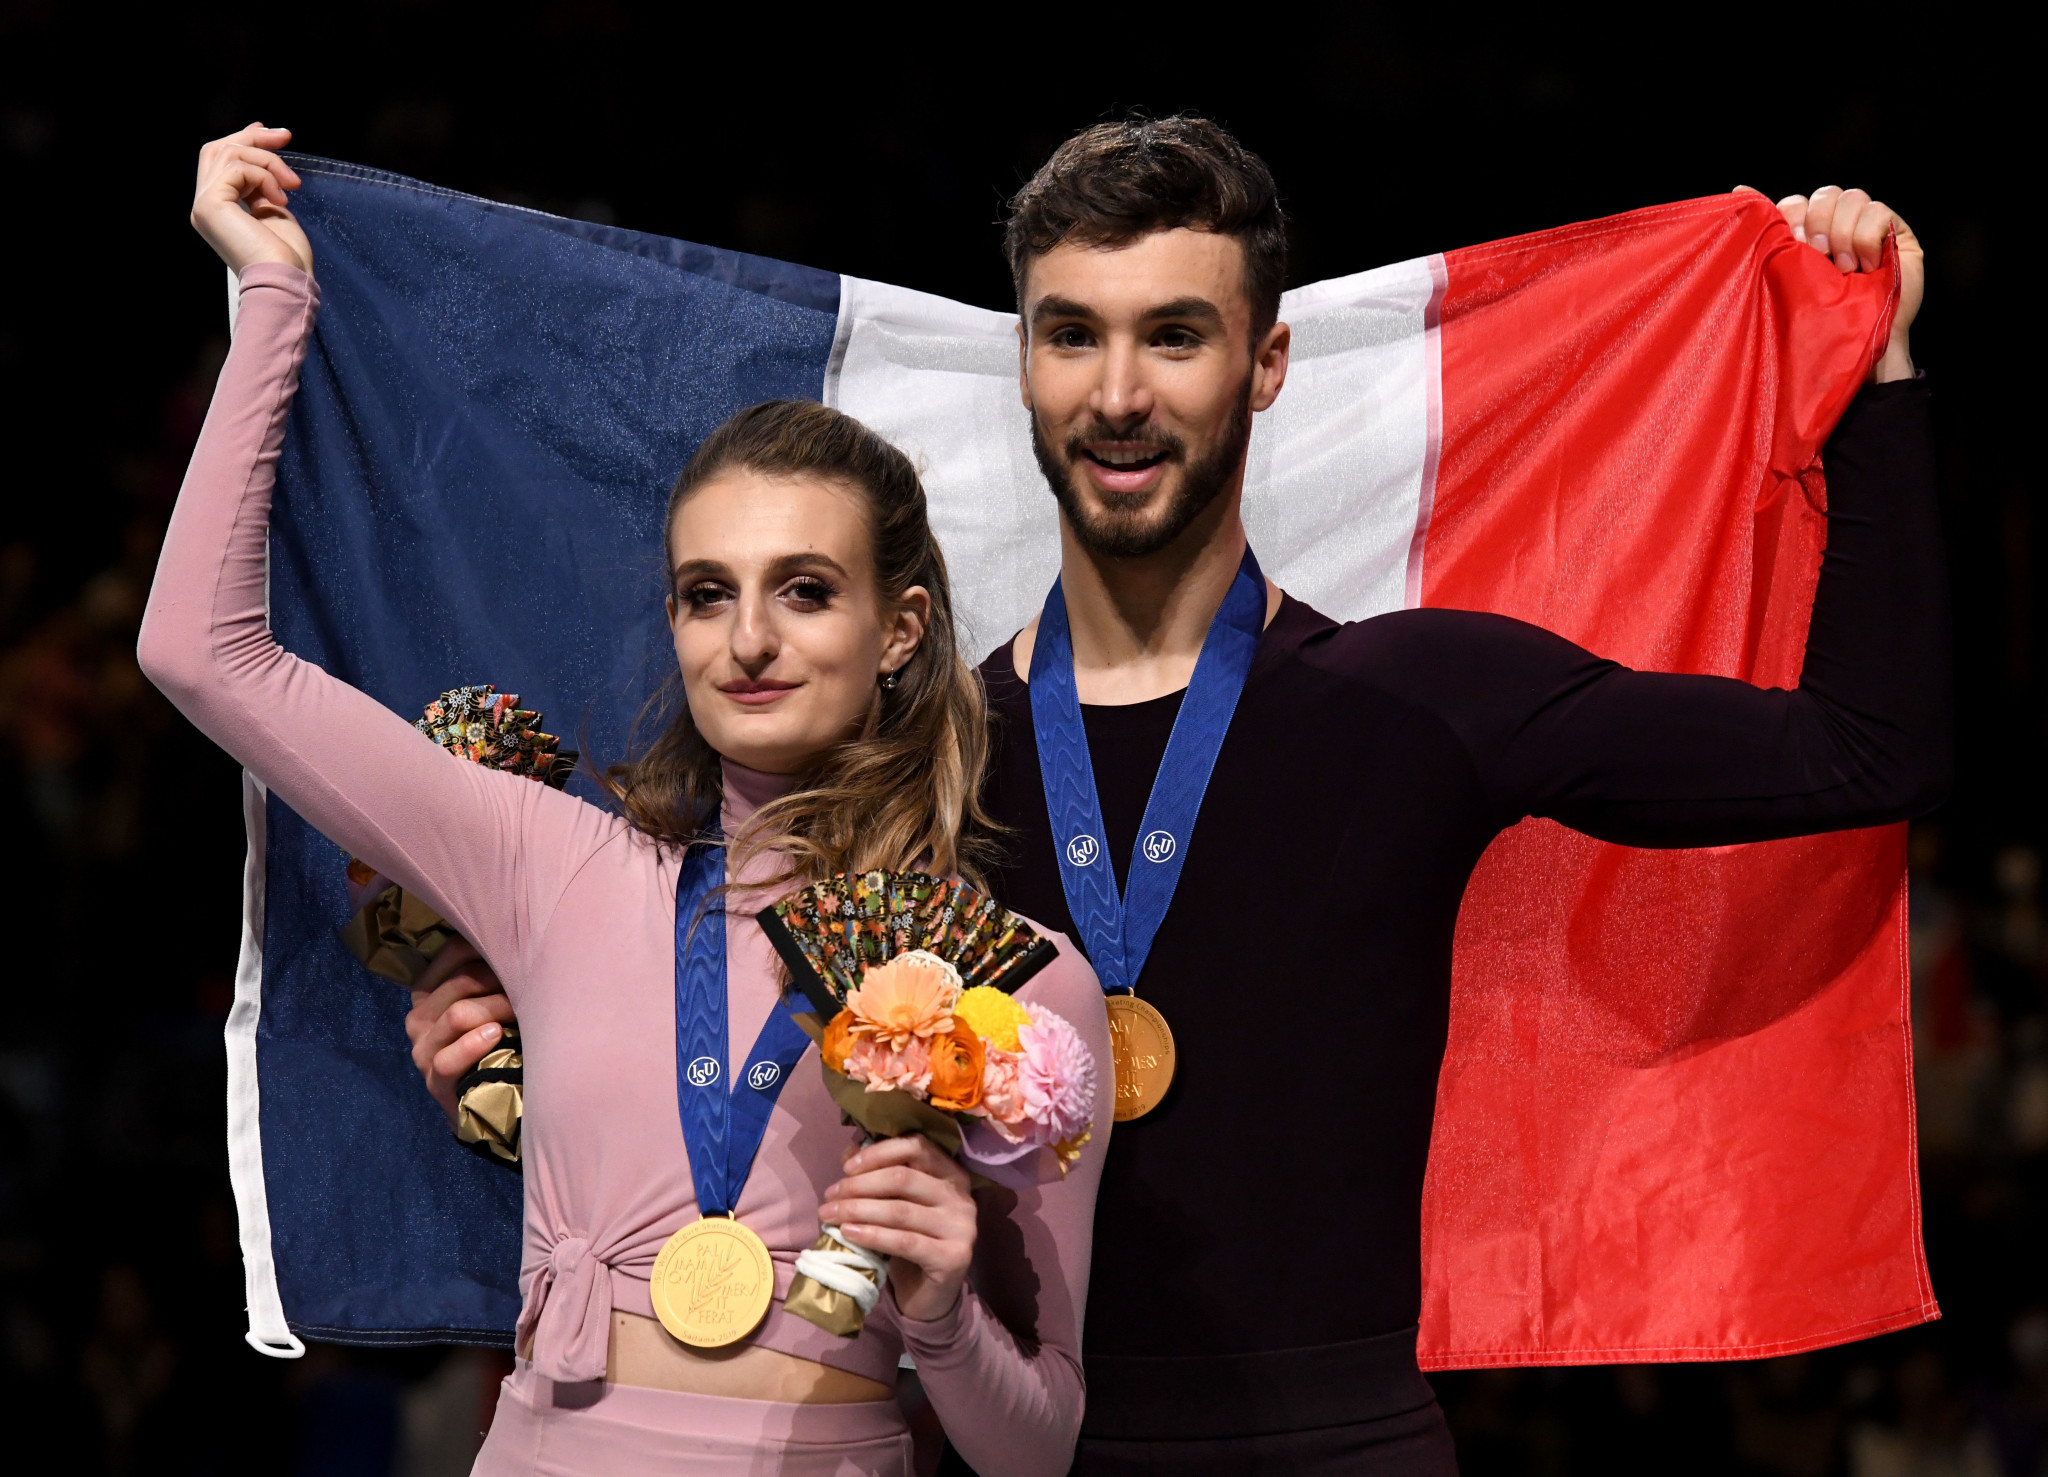 France;s ISU World Figure Skating Ice Dance champions Gabriella Papadakis and Guillaume Cizeron are sure to entertain in Sapporo as they seek another victory in the Grand Prix of Figure Skating series ©Getty Images